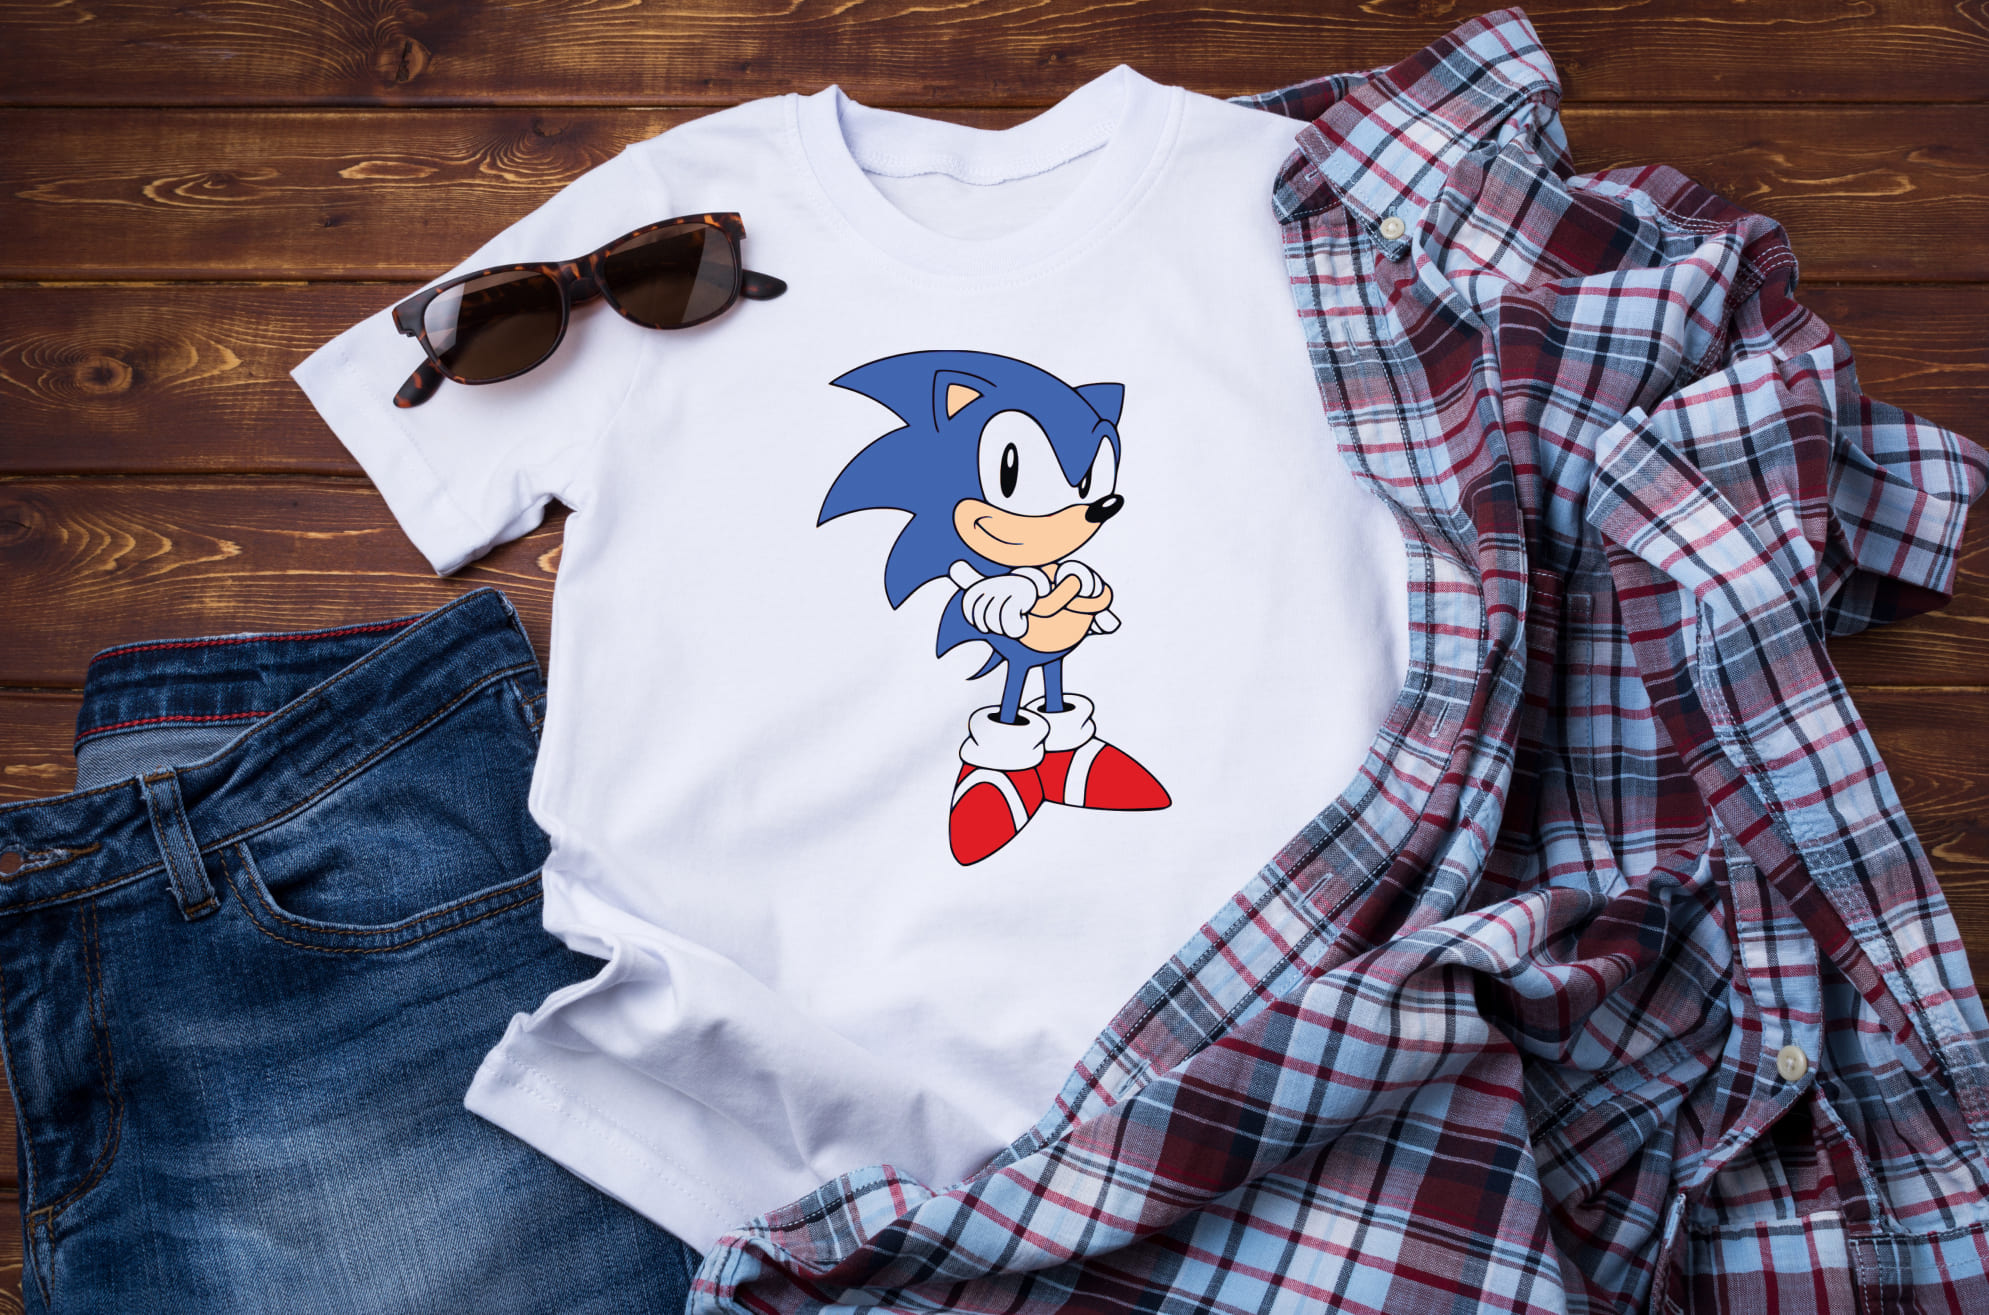 So wondered Sonic on the white t-shirt.